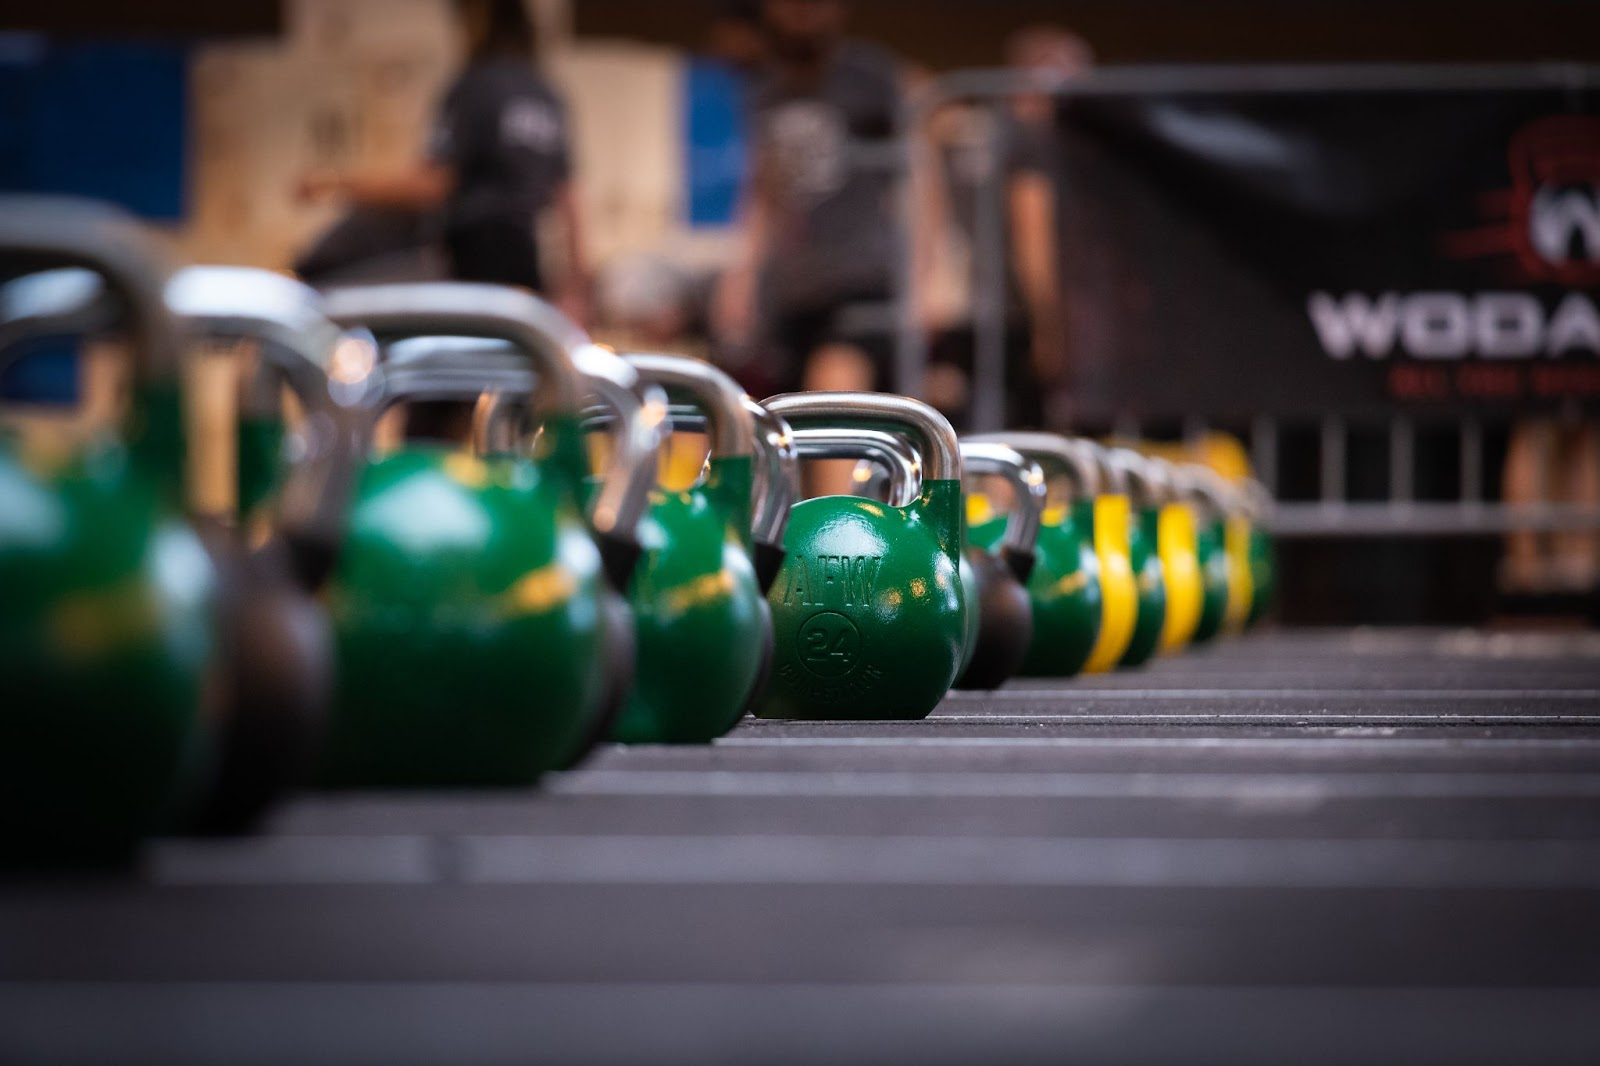 Kettle Bells - Latest Health Trends - Healthy and better living